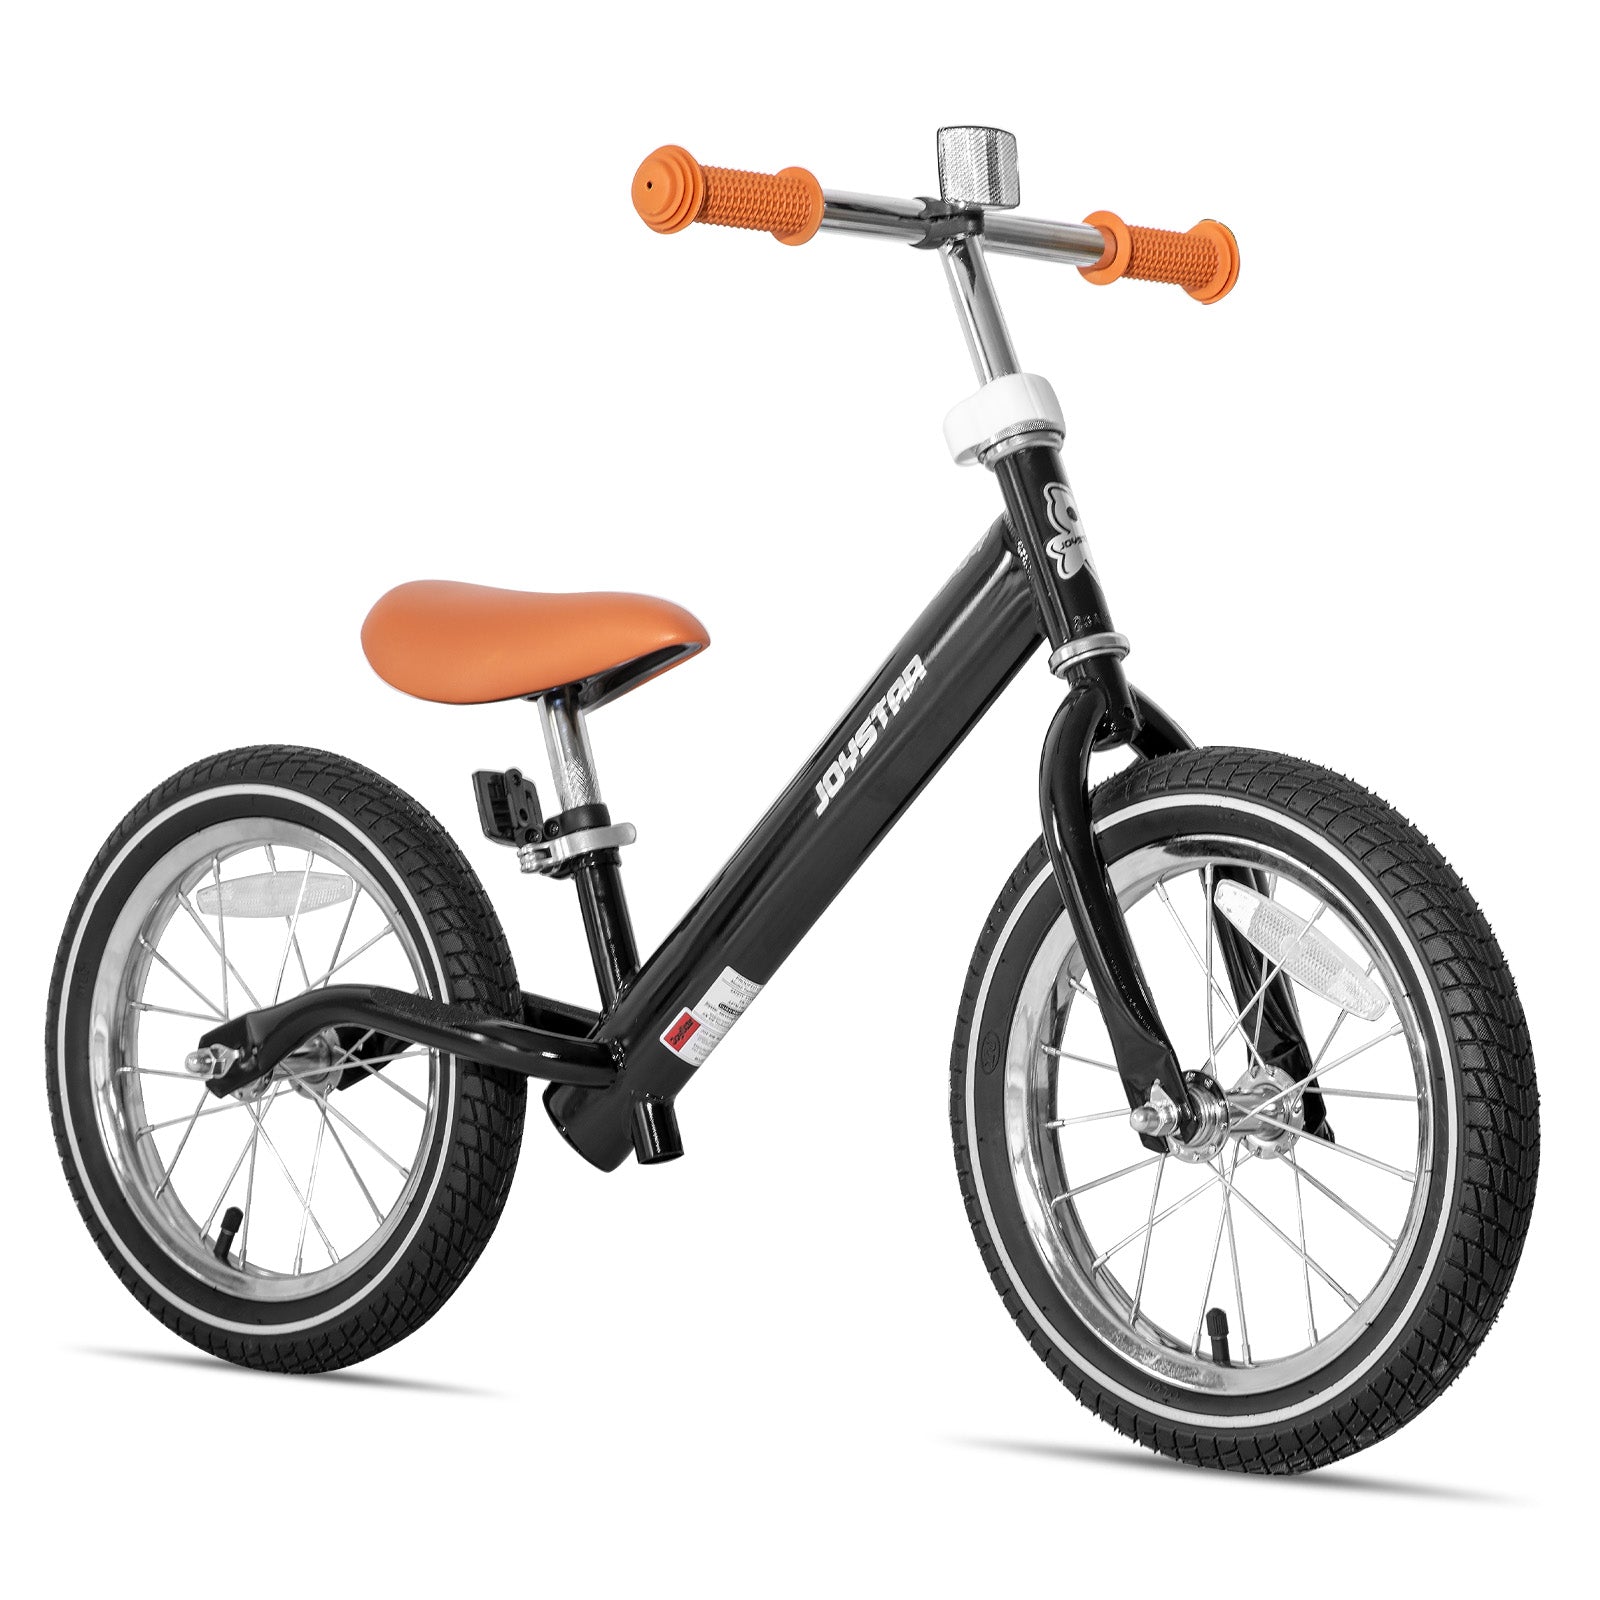 JOYSTAR 14/16 Inch Balance Bike for Toddlers and Kids Ages 3-8 Years Old